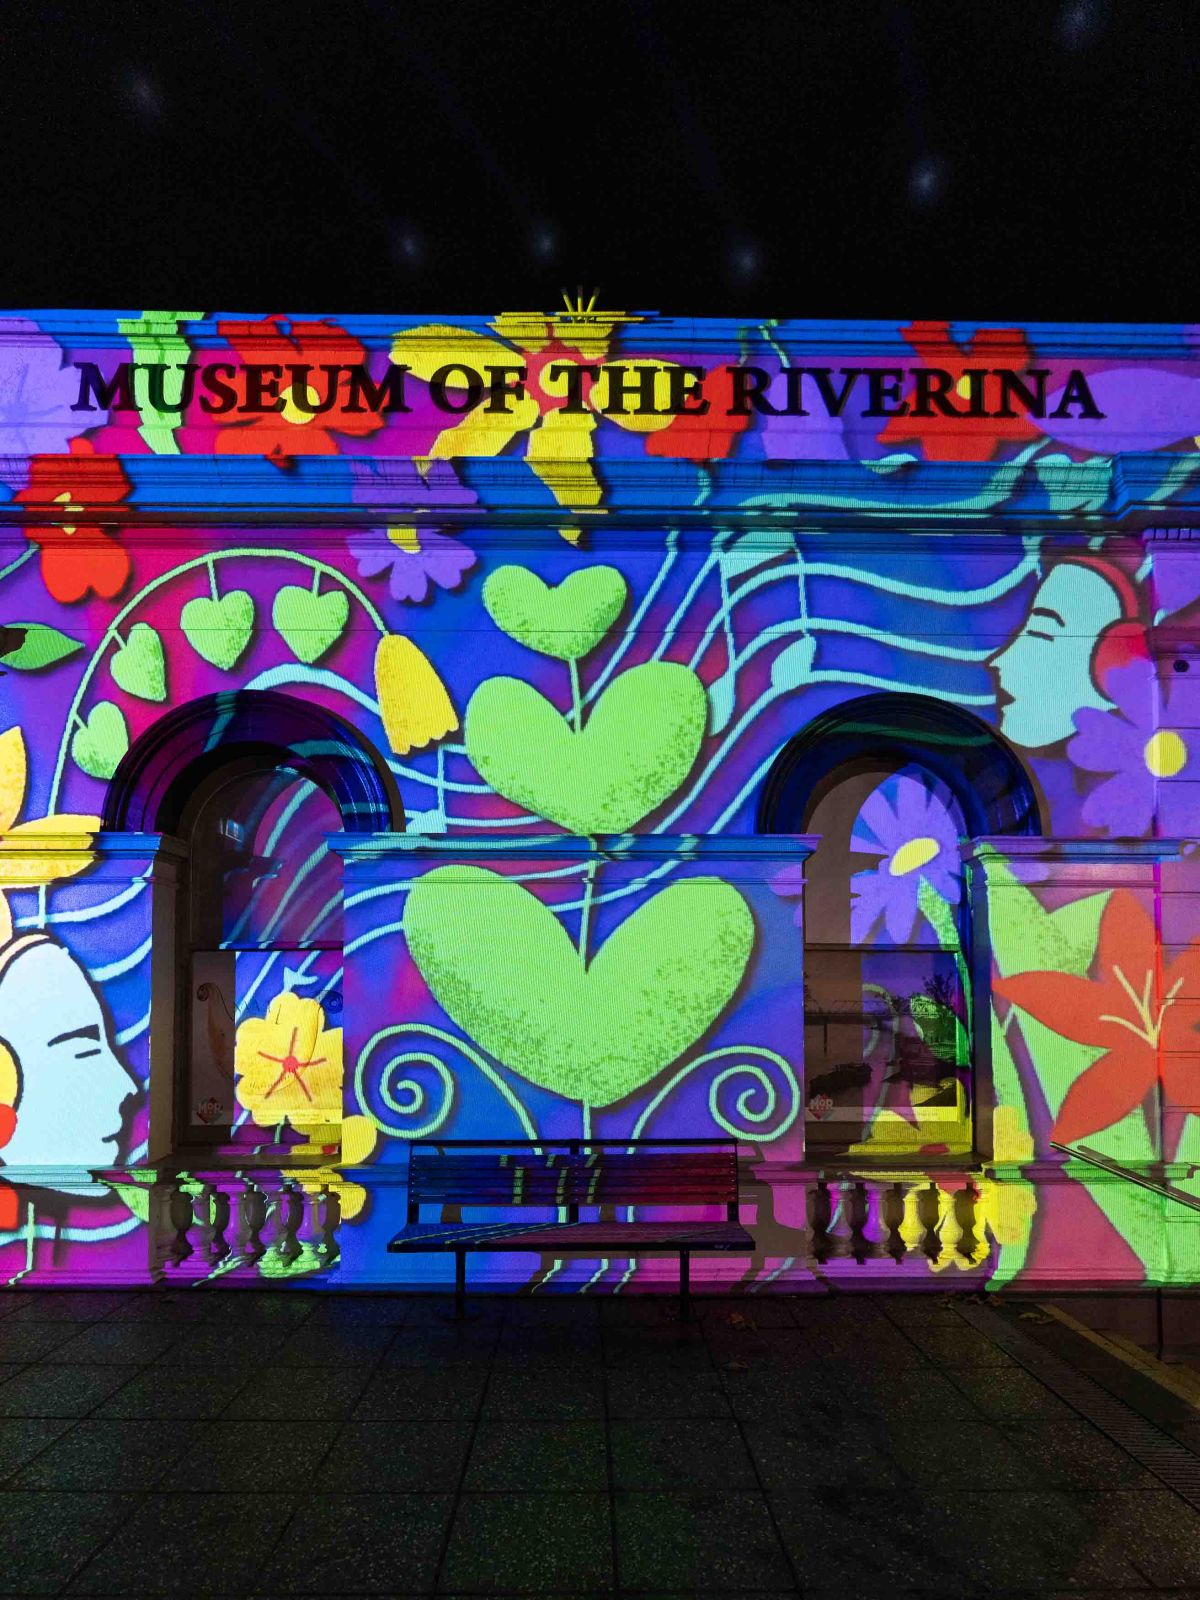 A projection of light and colour on the façade of the Museum of the Riverina Historic Council Chambers at night-time during Festival of W